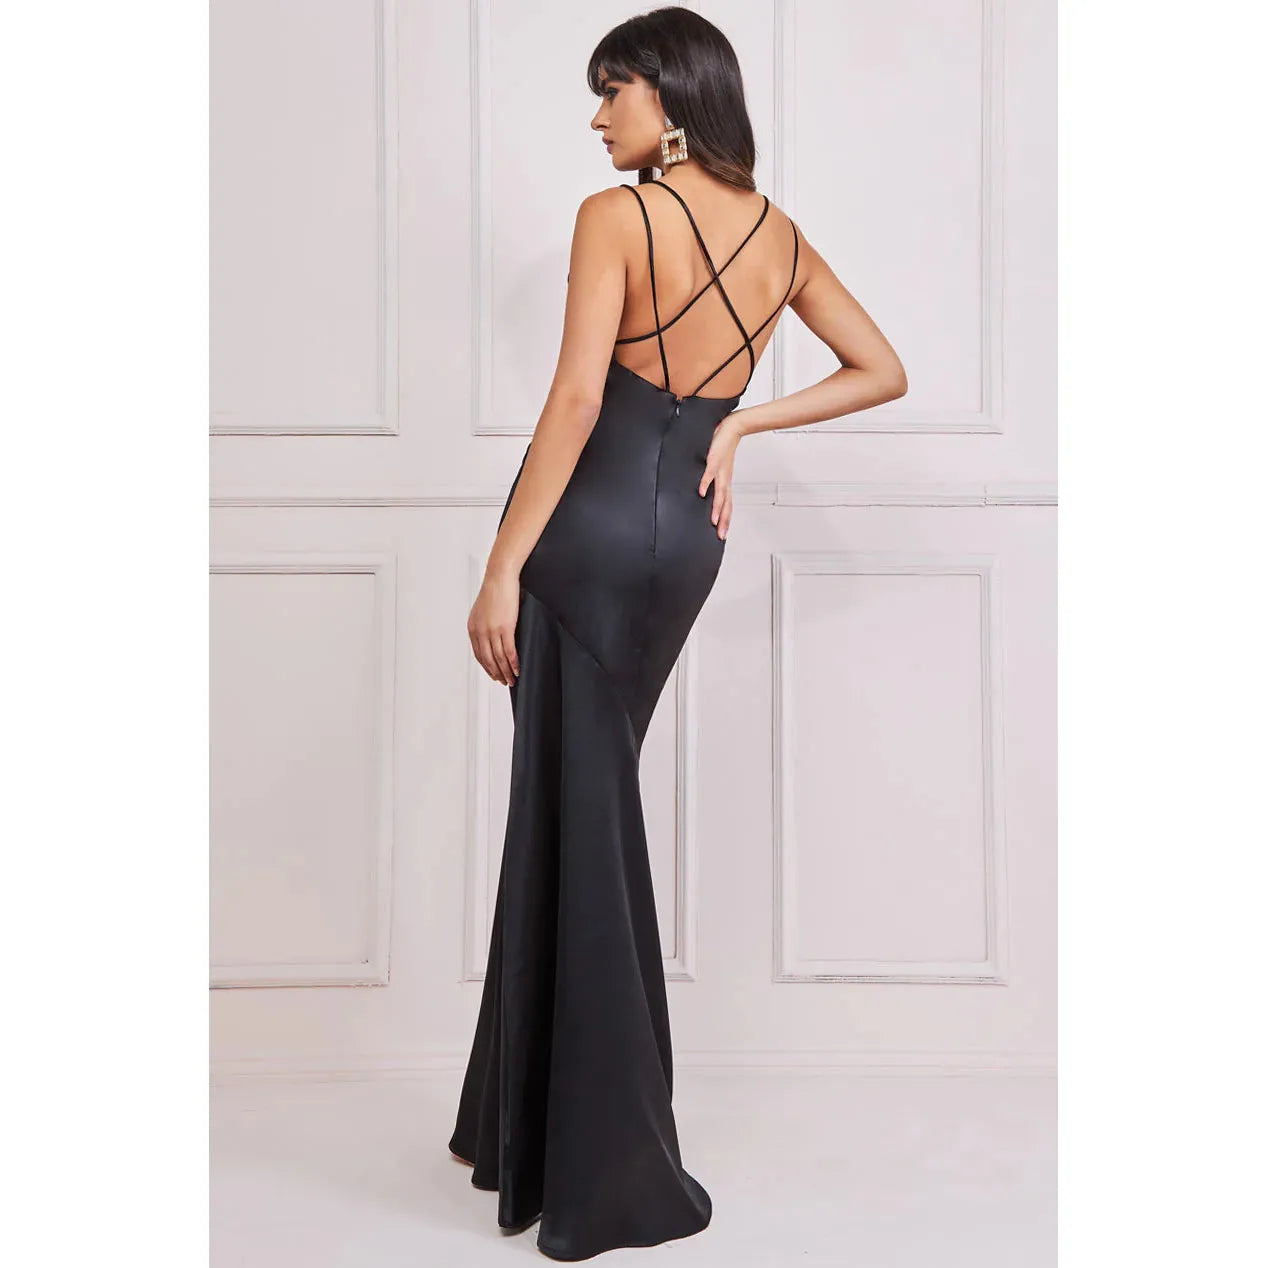 Cowl Neck Satin Maxi Dress With Strappy Back - Black